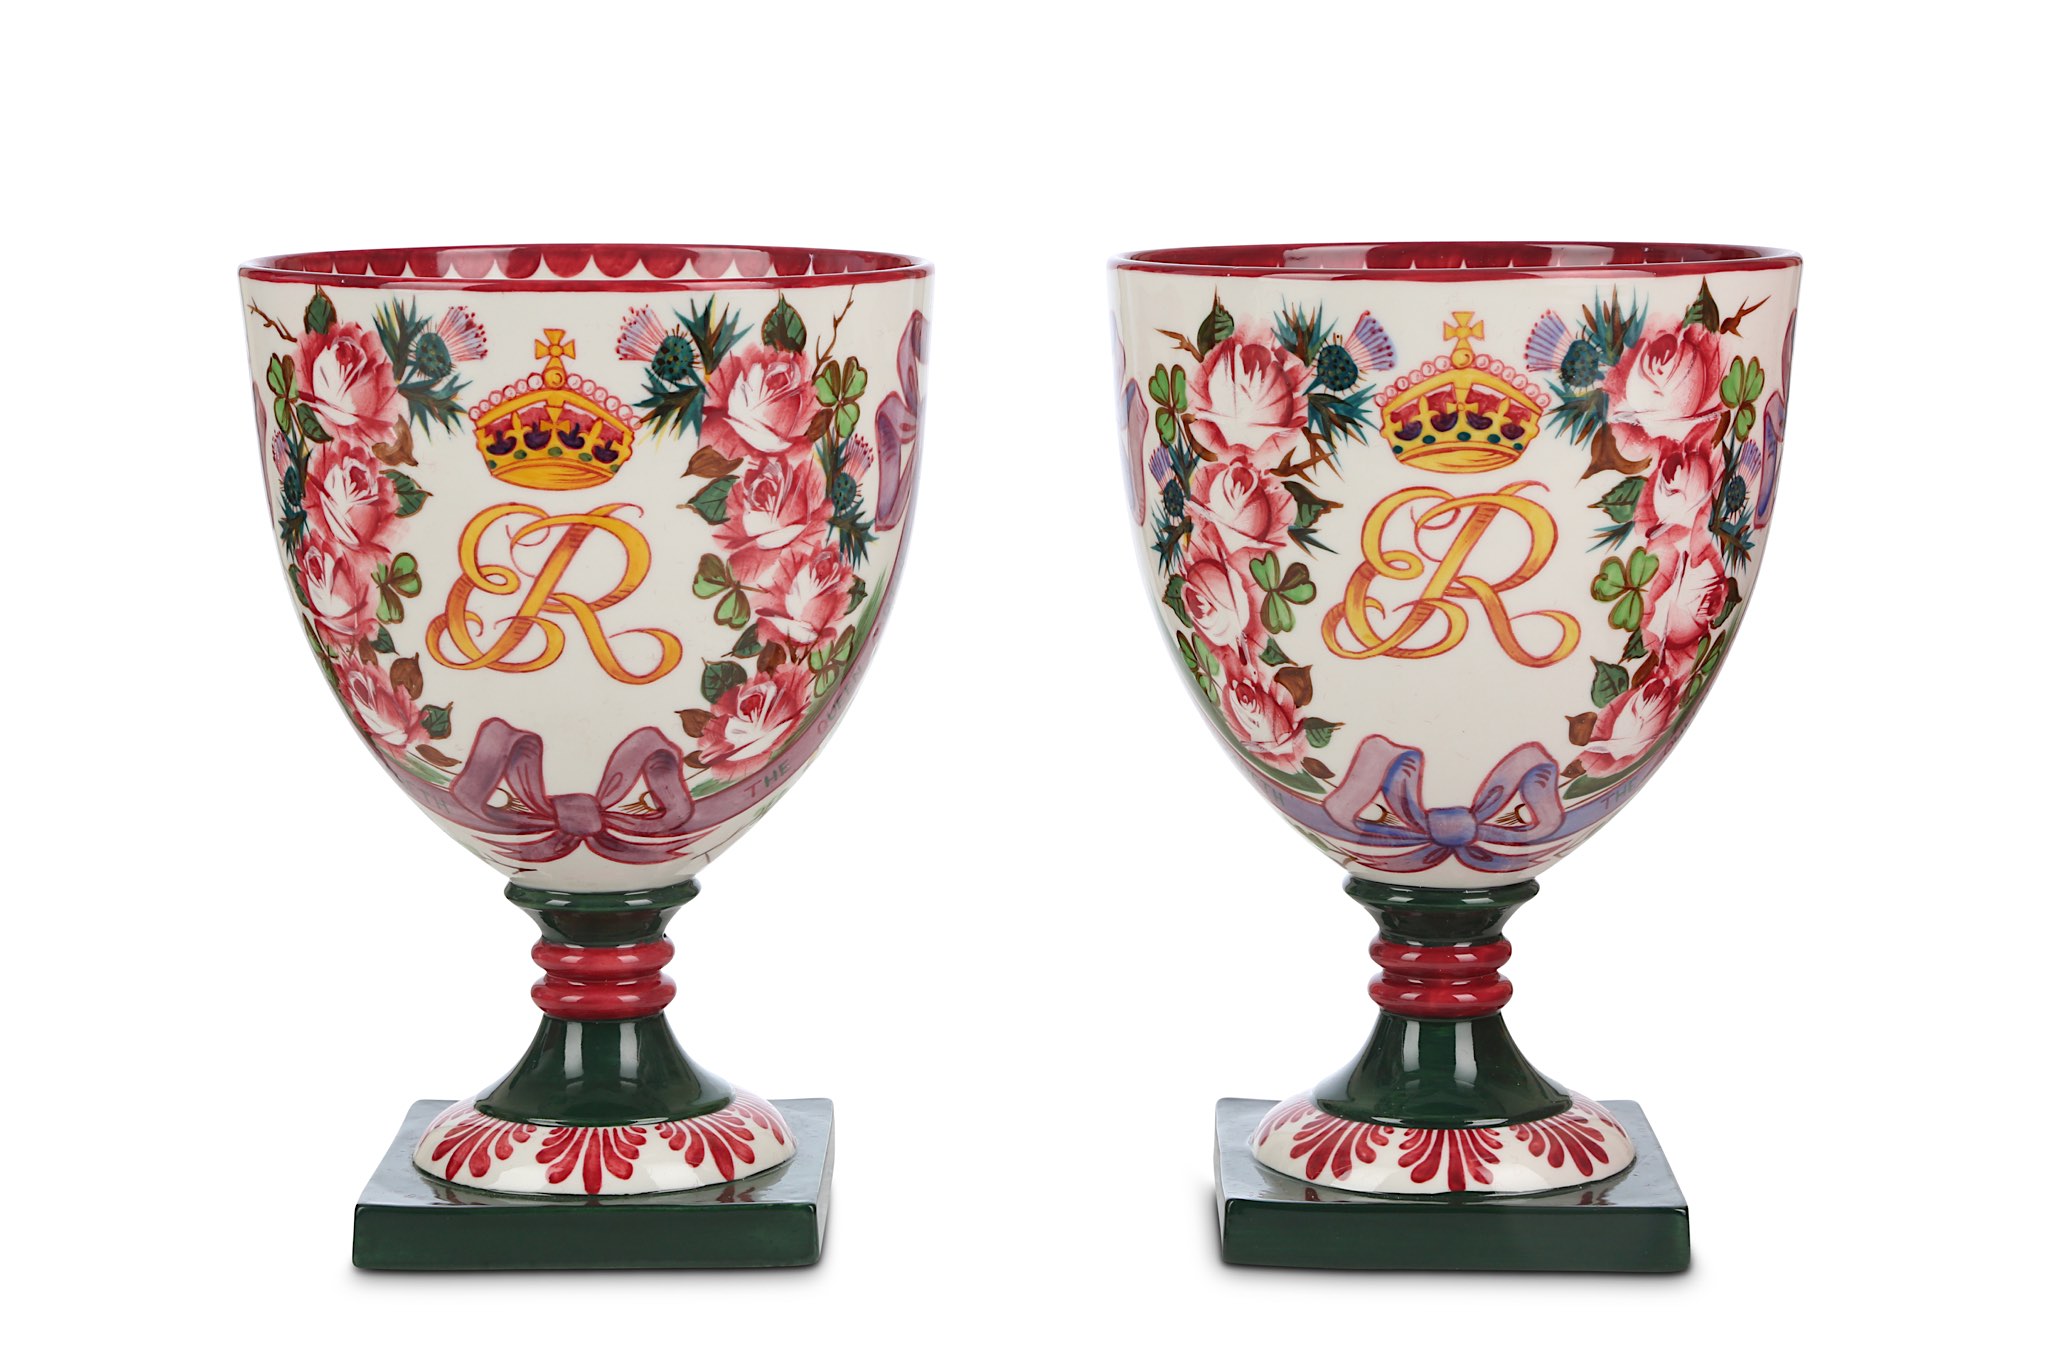 A PAIR OF ROYAL DOULTON COMMEMORATIVE POTTERY GOBLETS, circa 1980, commissioned by Rogers de Rin